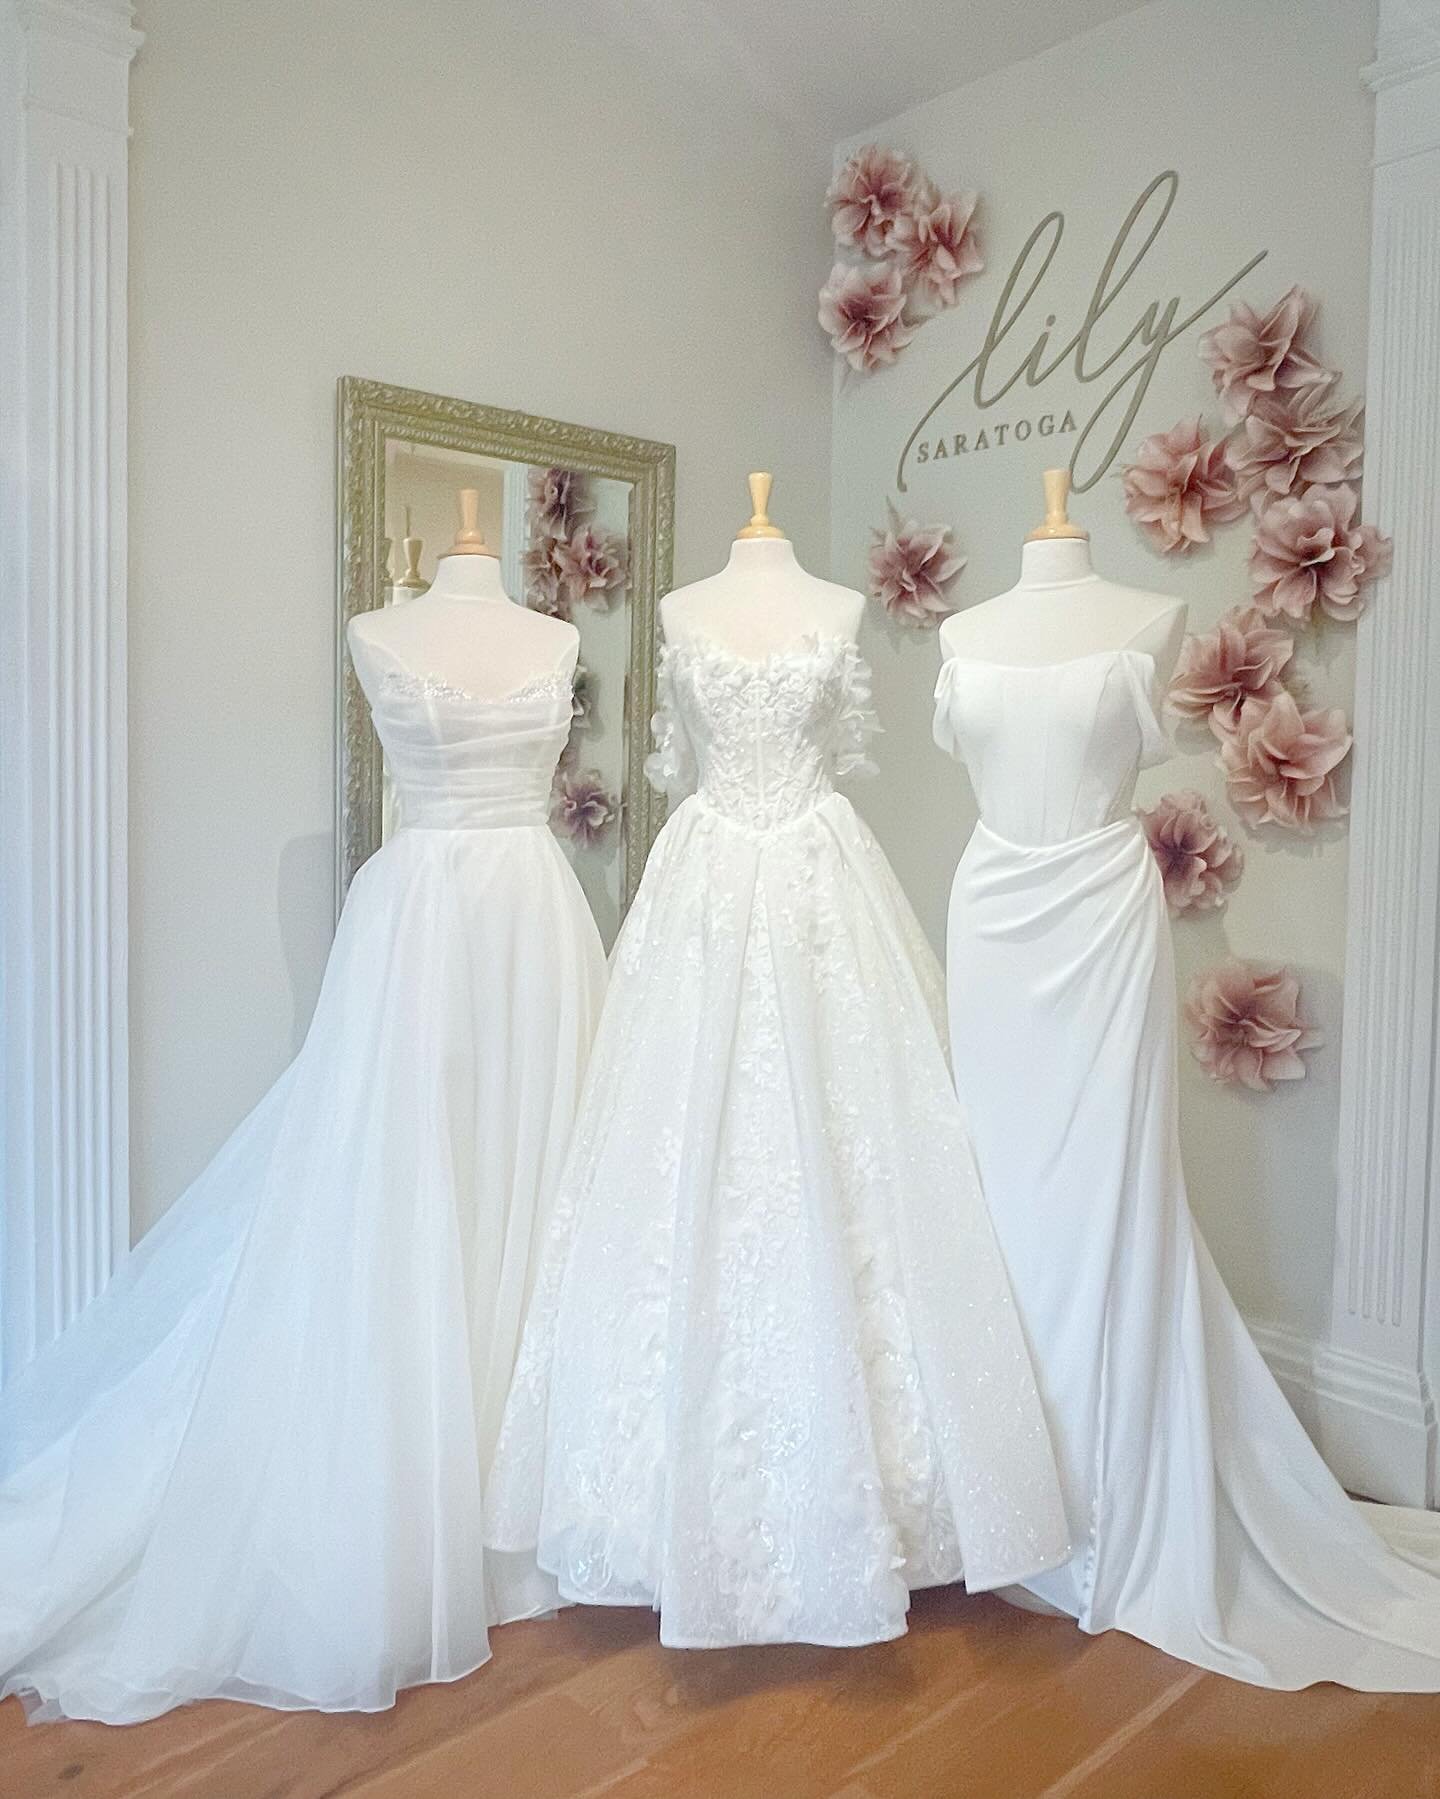 ✨🤍 This week&rsquo;s #windowwednesday is for today&rsquo;s fashion forward modern brides 🤍✨

(3) *brand* new styles for you to save and try at your upcoming bridal appointment! (Left) @essenseofaustralia D4124 A-Line Strapless Gown with illusion co